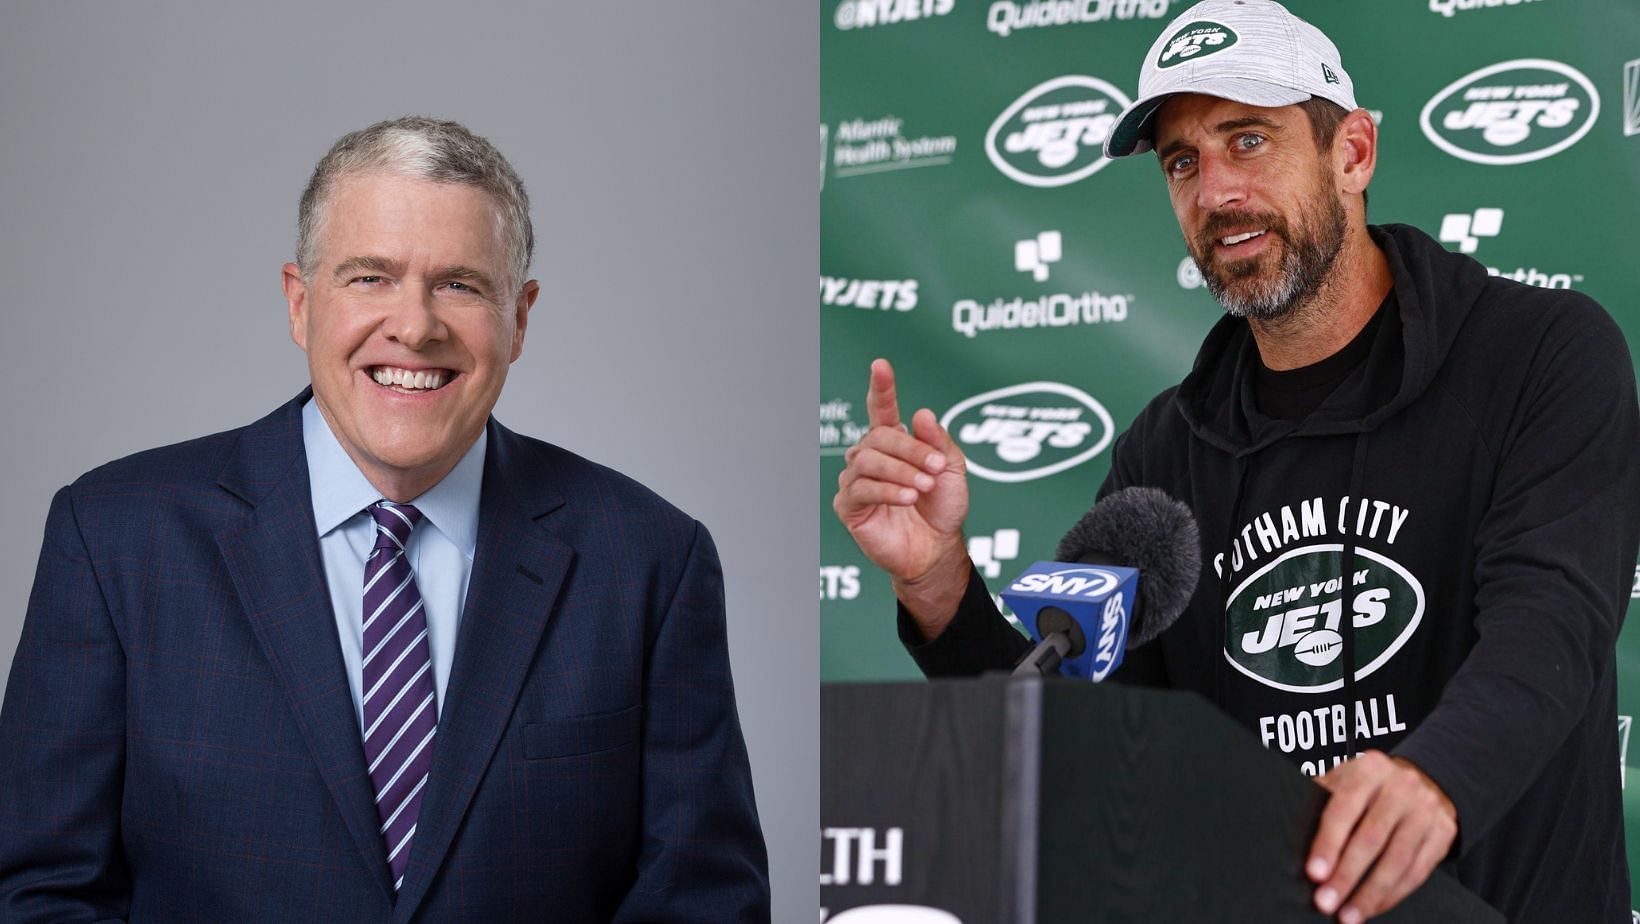 Rodgers is in love with the Jets, according to Peter King